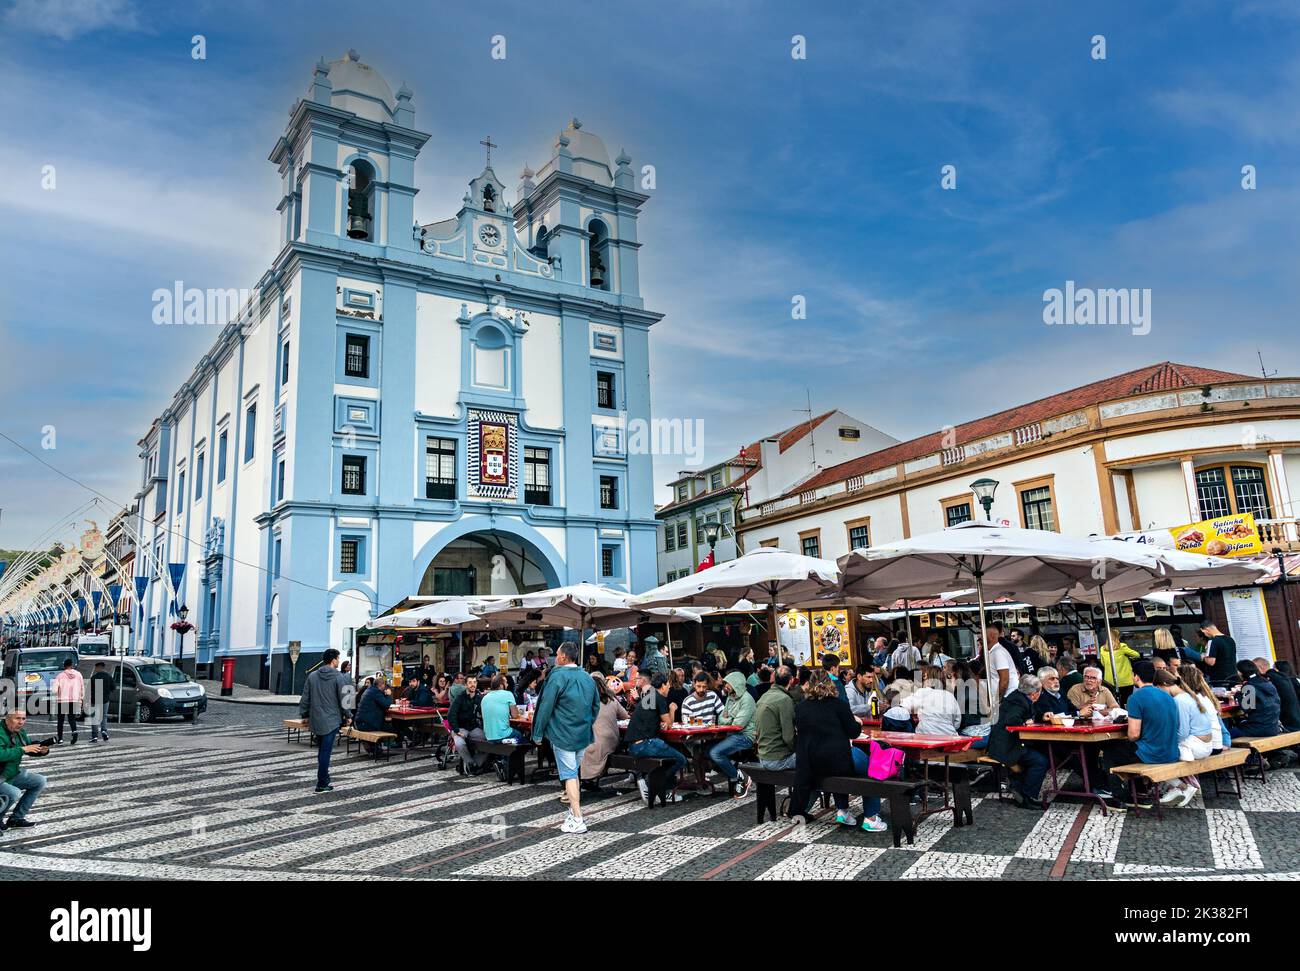 Open air cafes along the promenade in front of the Igreja da Misericordia Church in the historic centre of Angra do Heroismo, Terceira Island, Azores, Portugal. Stock Photo